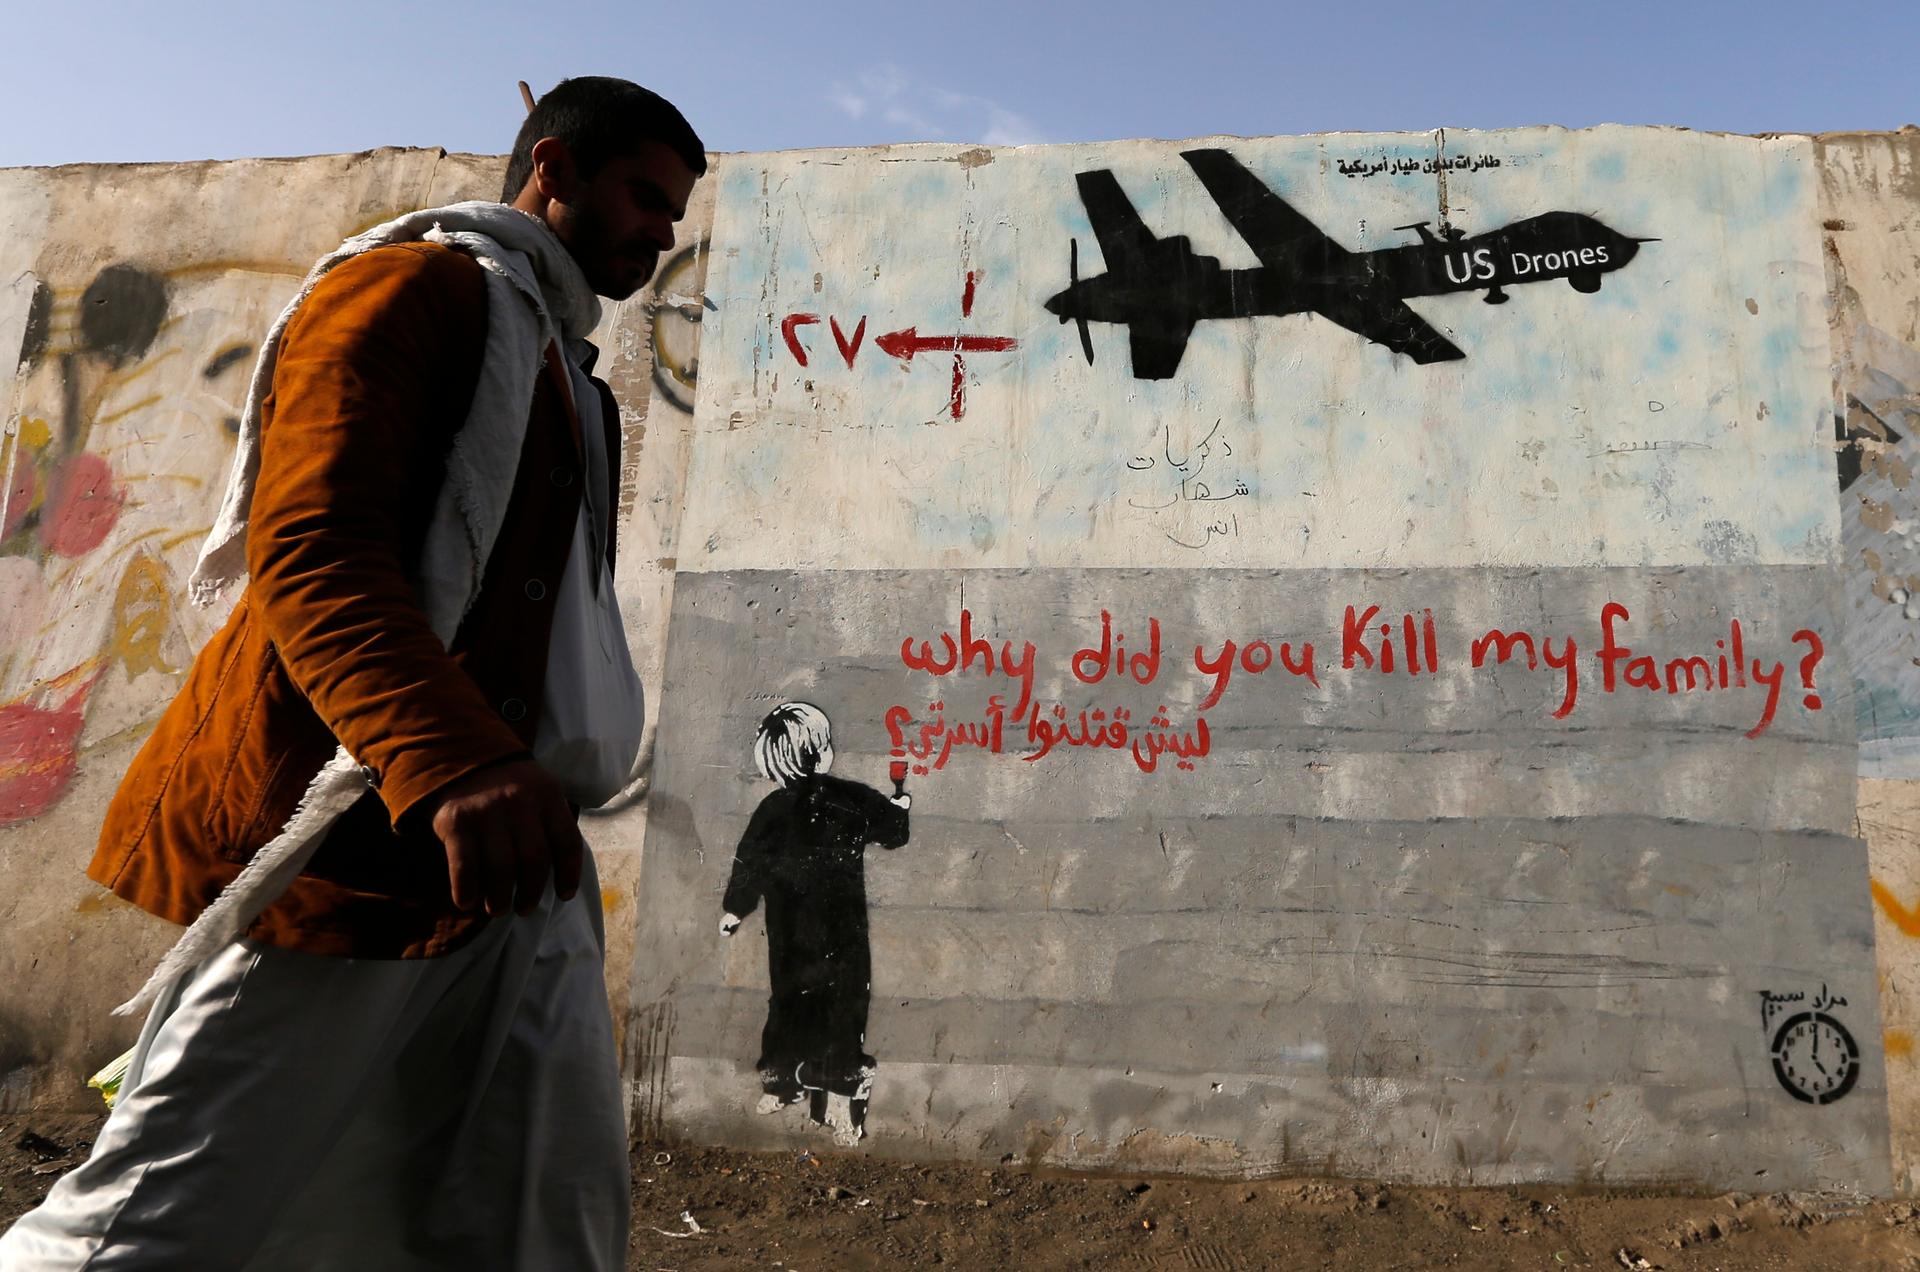 A man walks past graffiti denouncing US drone strikes in Yemen painted on a wall in Sana'a on November 13, 2014.